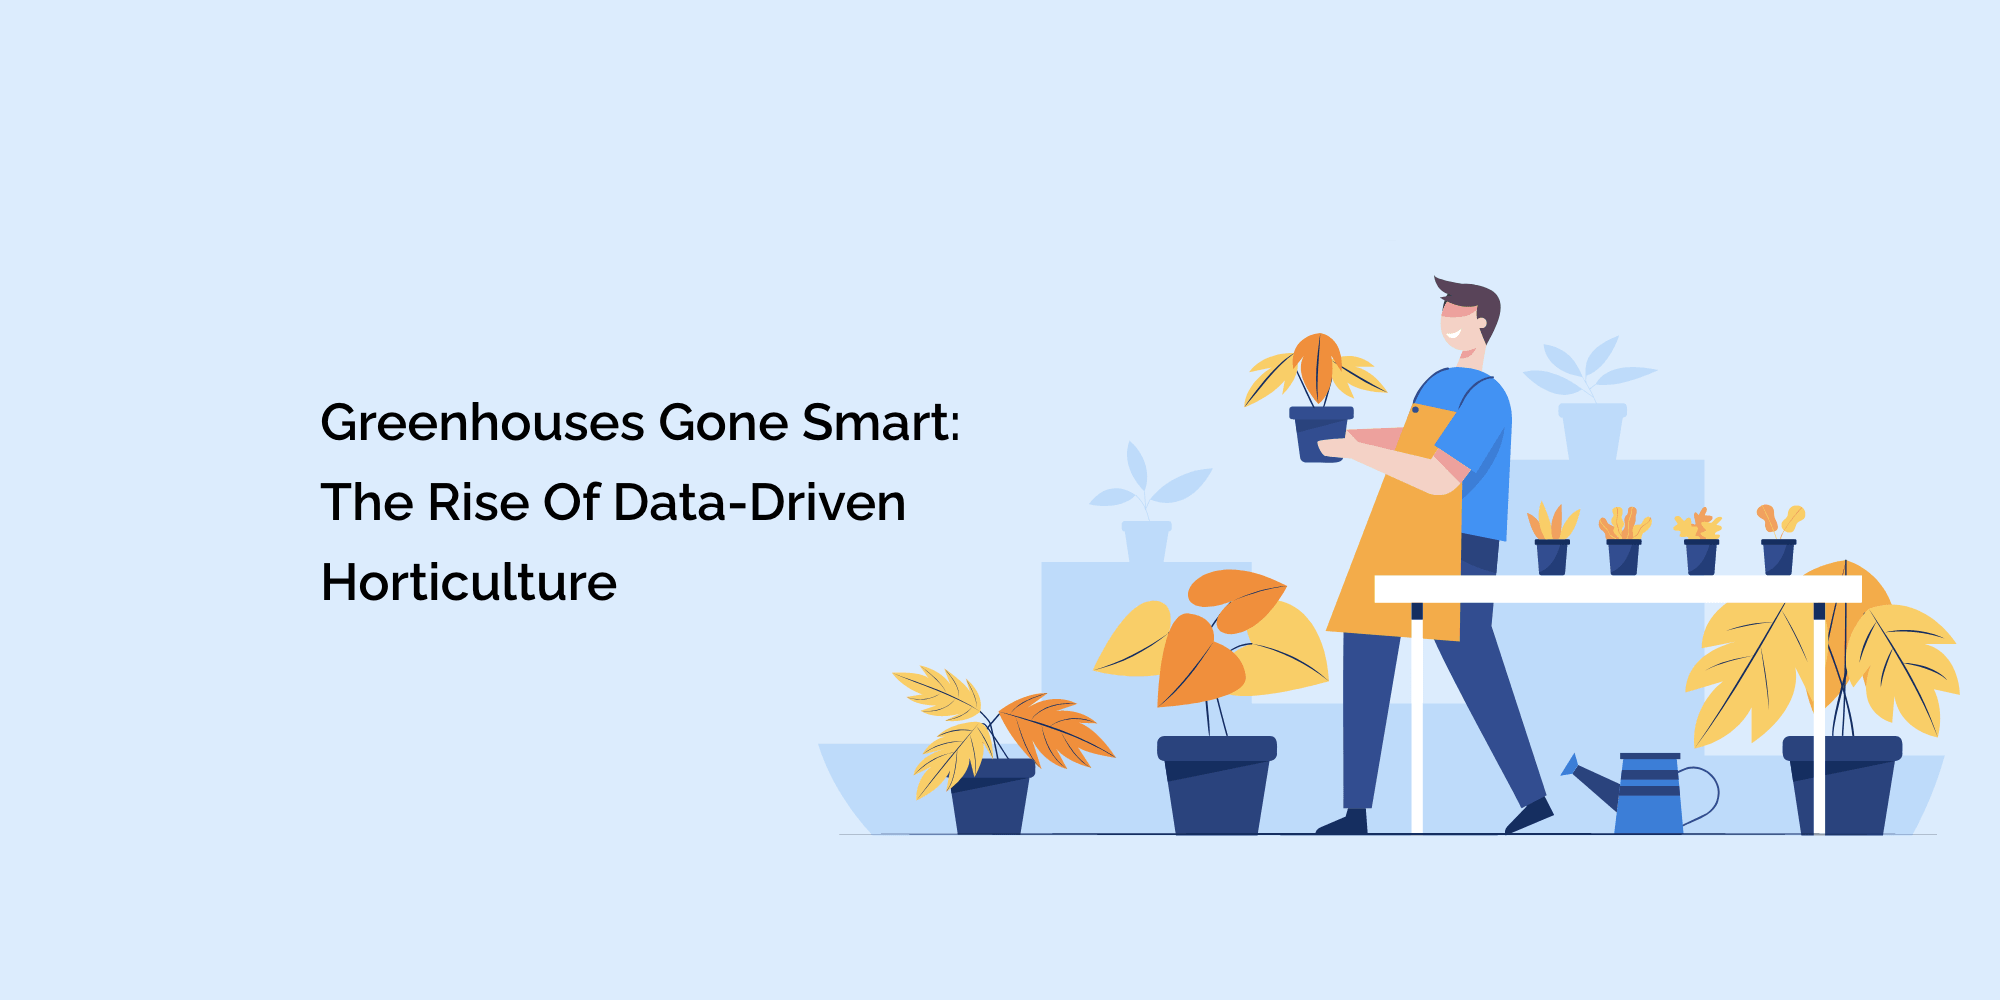 Greenhouses Gone Smart: The Rise of Data-Driven Horticulture